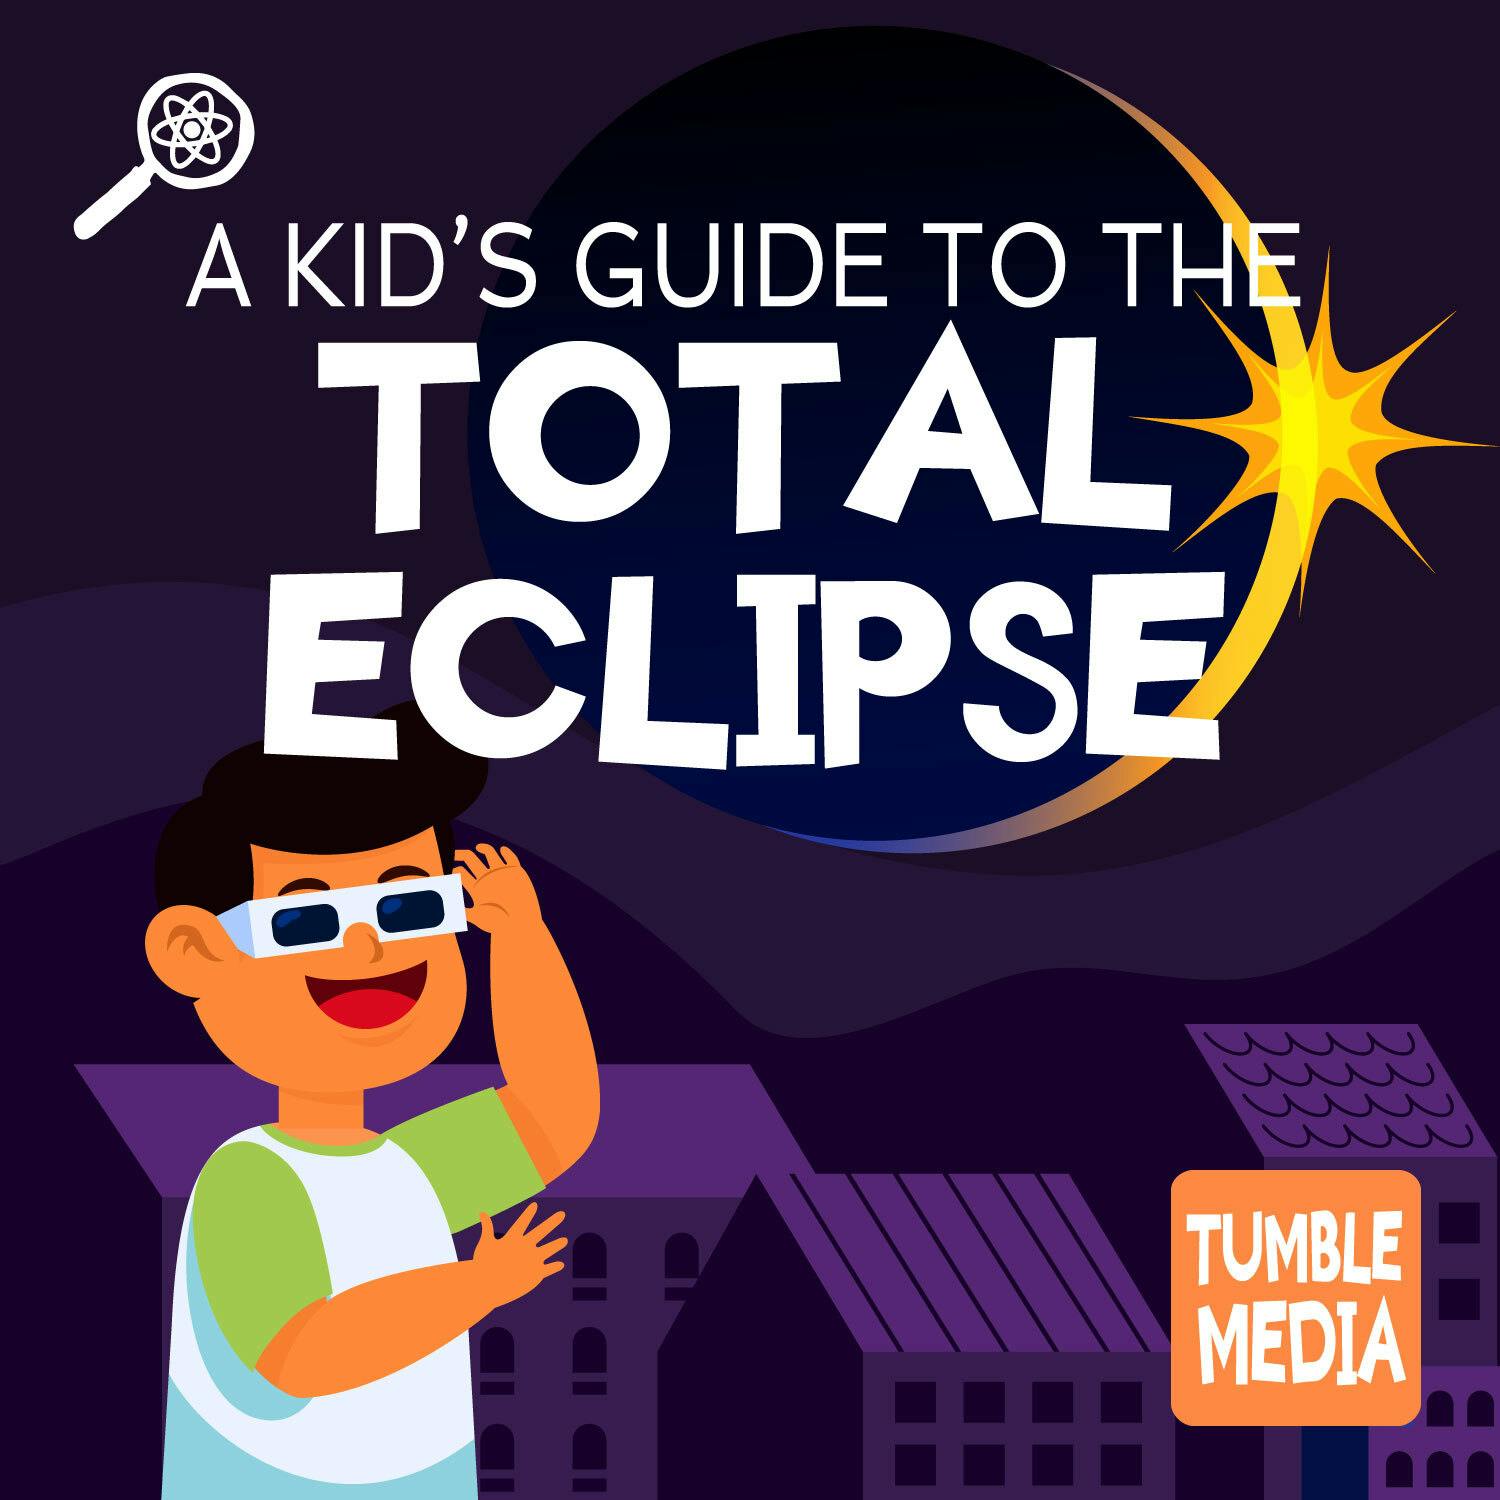 A Kid’s Guide to the Total Eclipse